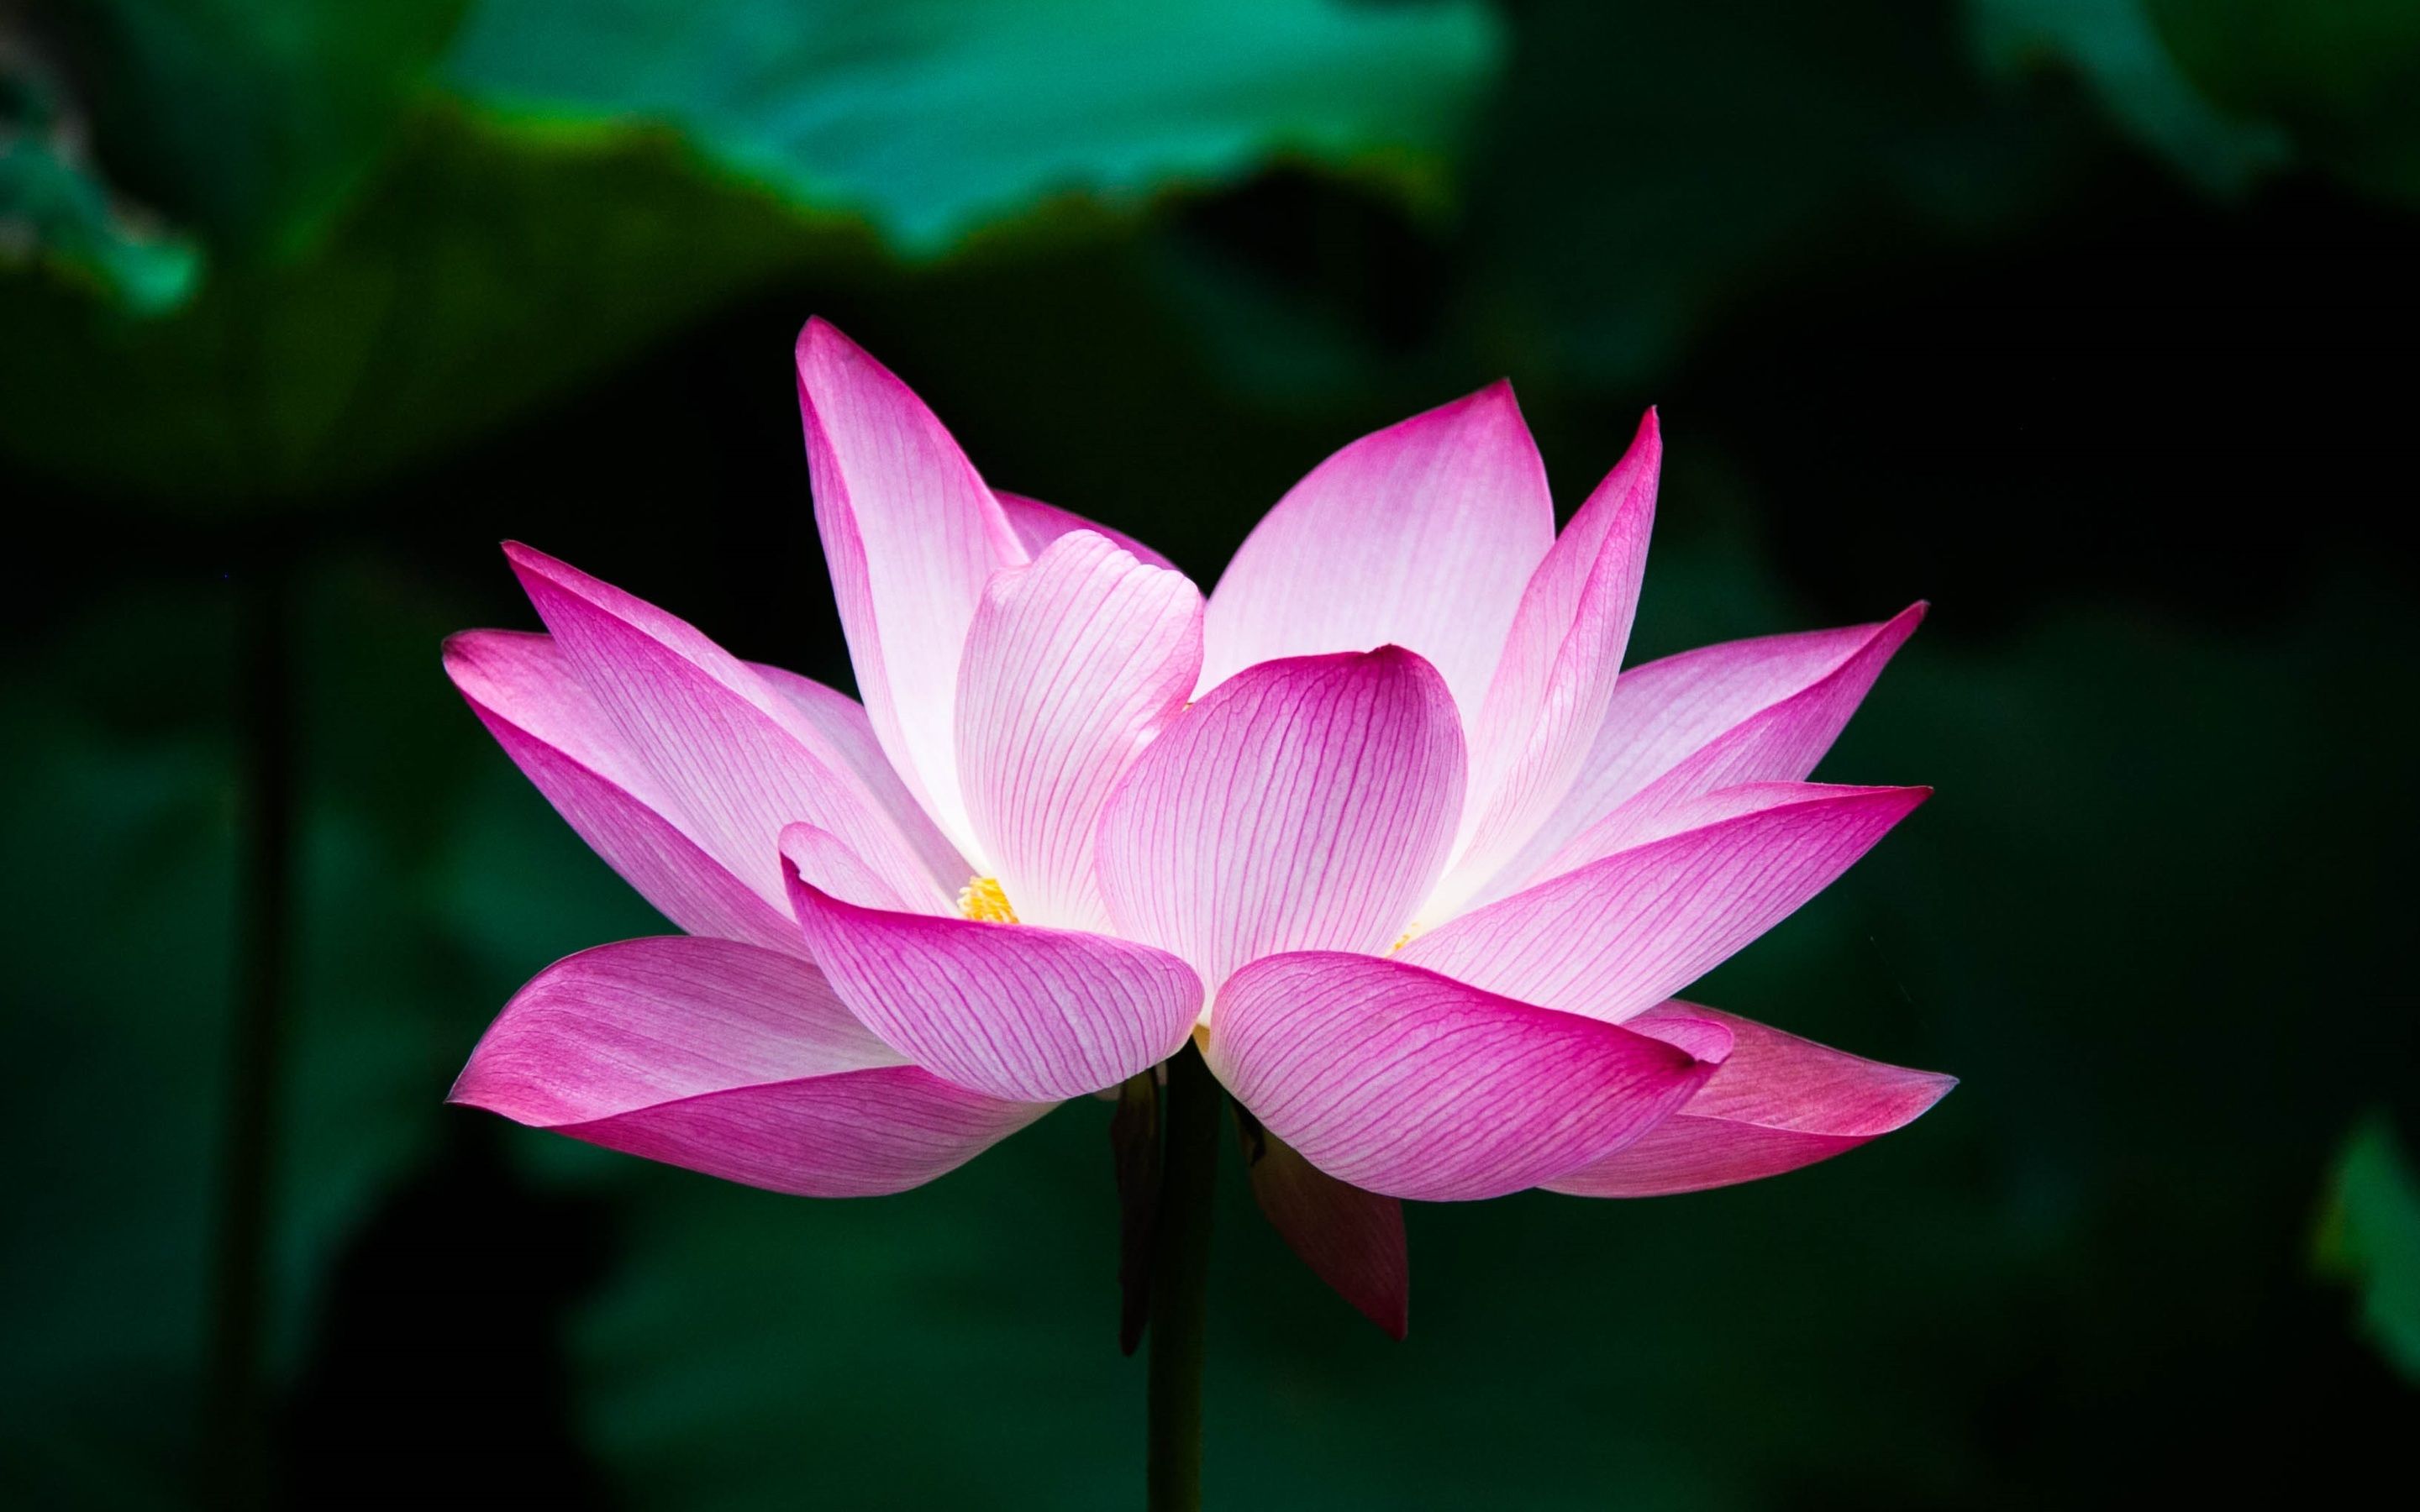 Lotus Flower 4k Macbook Pro Retina HD 4k Wallpaper, Image, Background, Photo and Picture